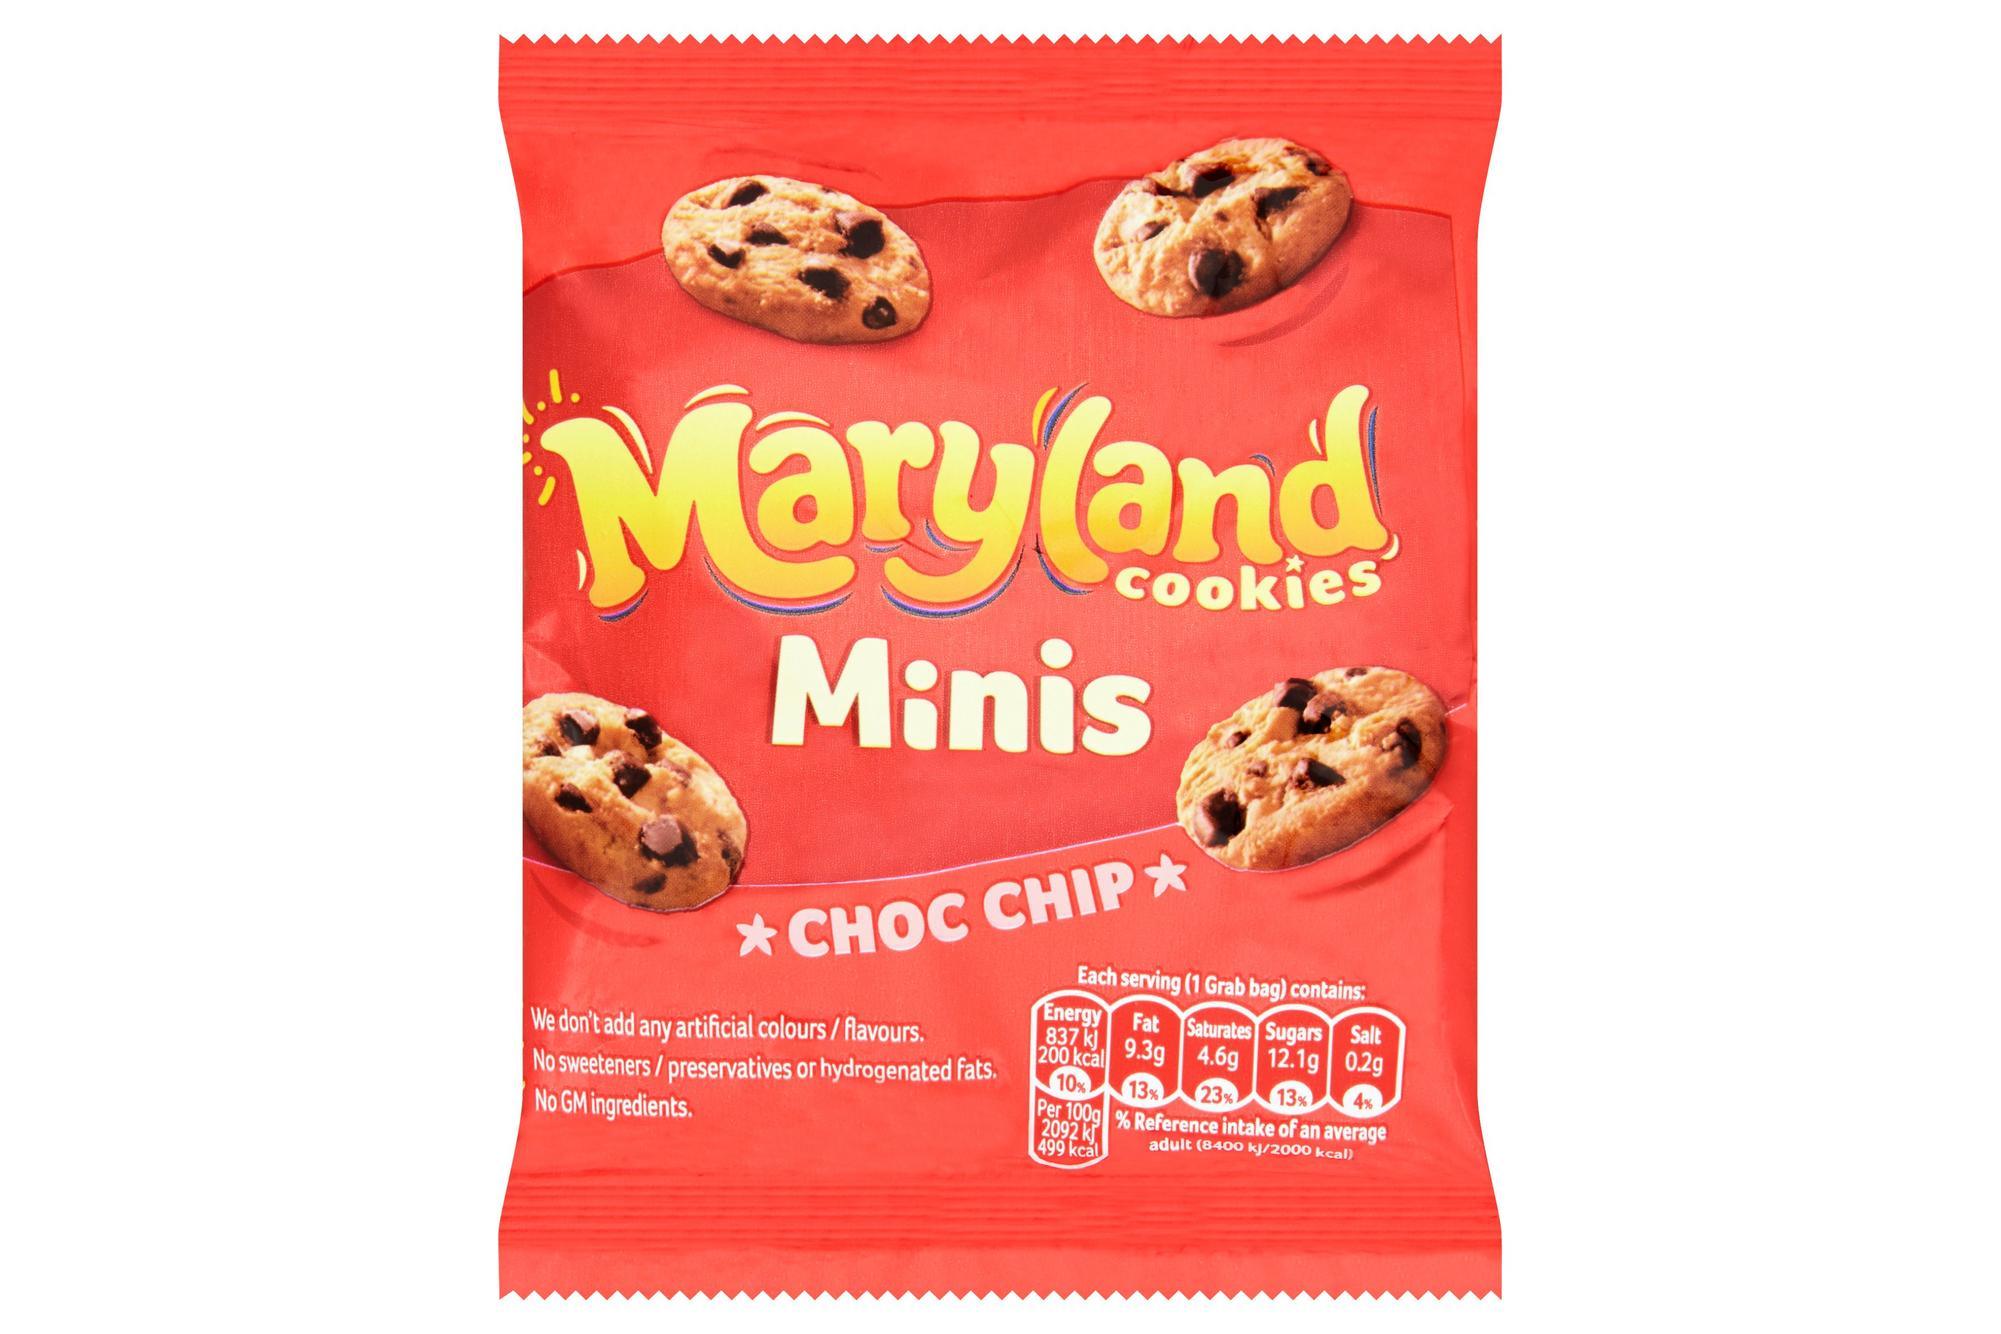 Maryland Mini Chocolate Chip Cookies Grab Bag - Catering Box 48x40g - Vending Superstore